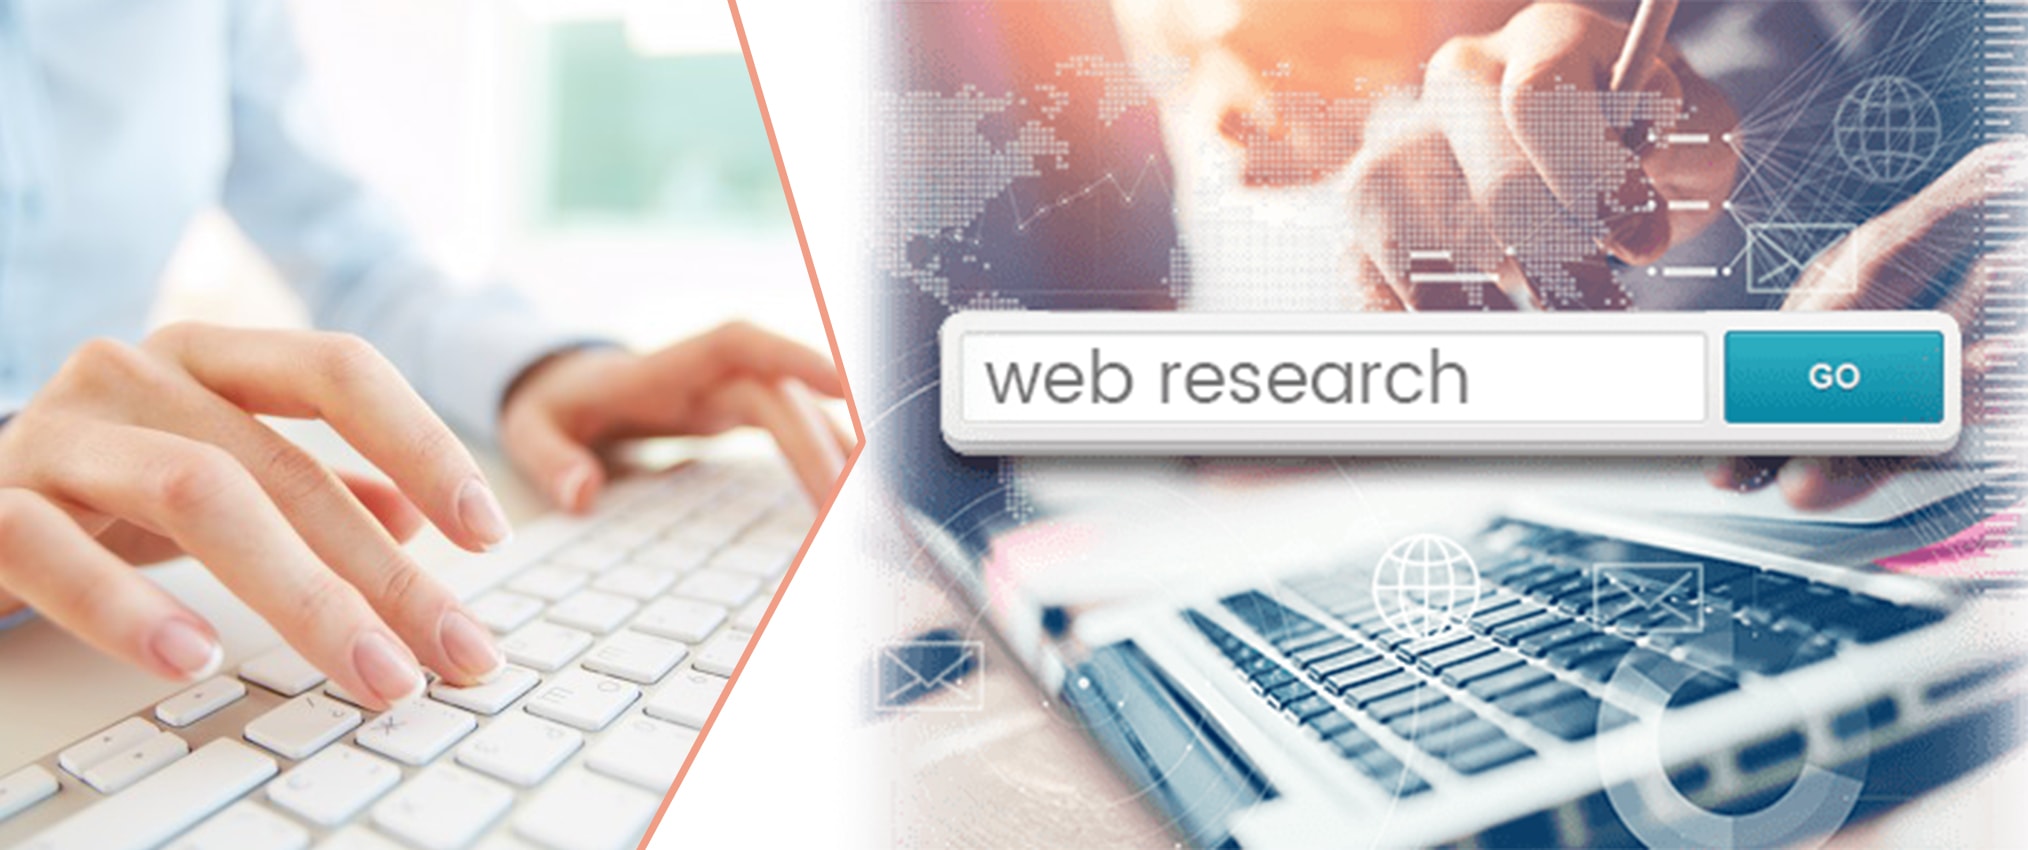 web research services helps ecommerce marketing